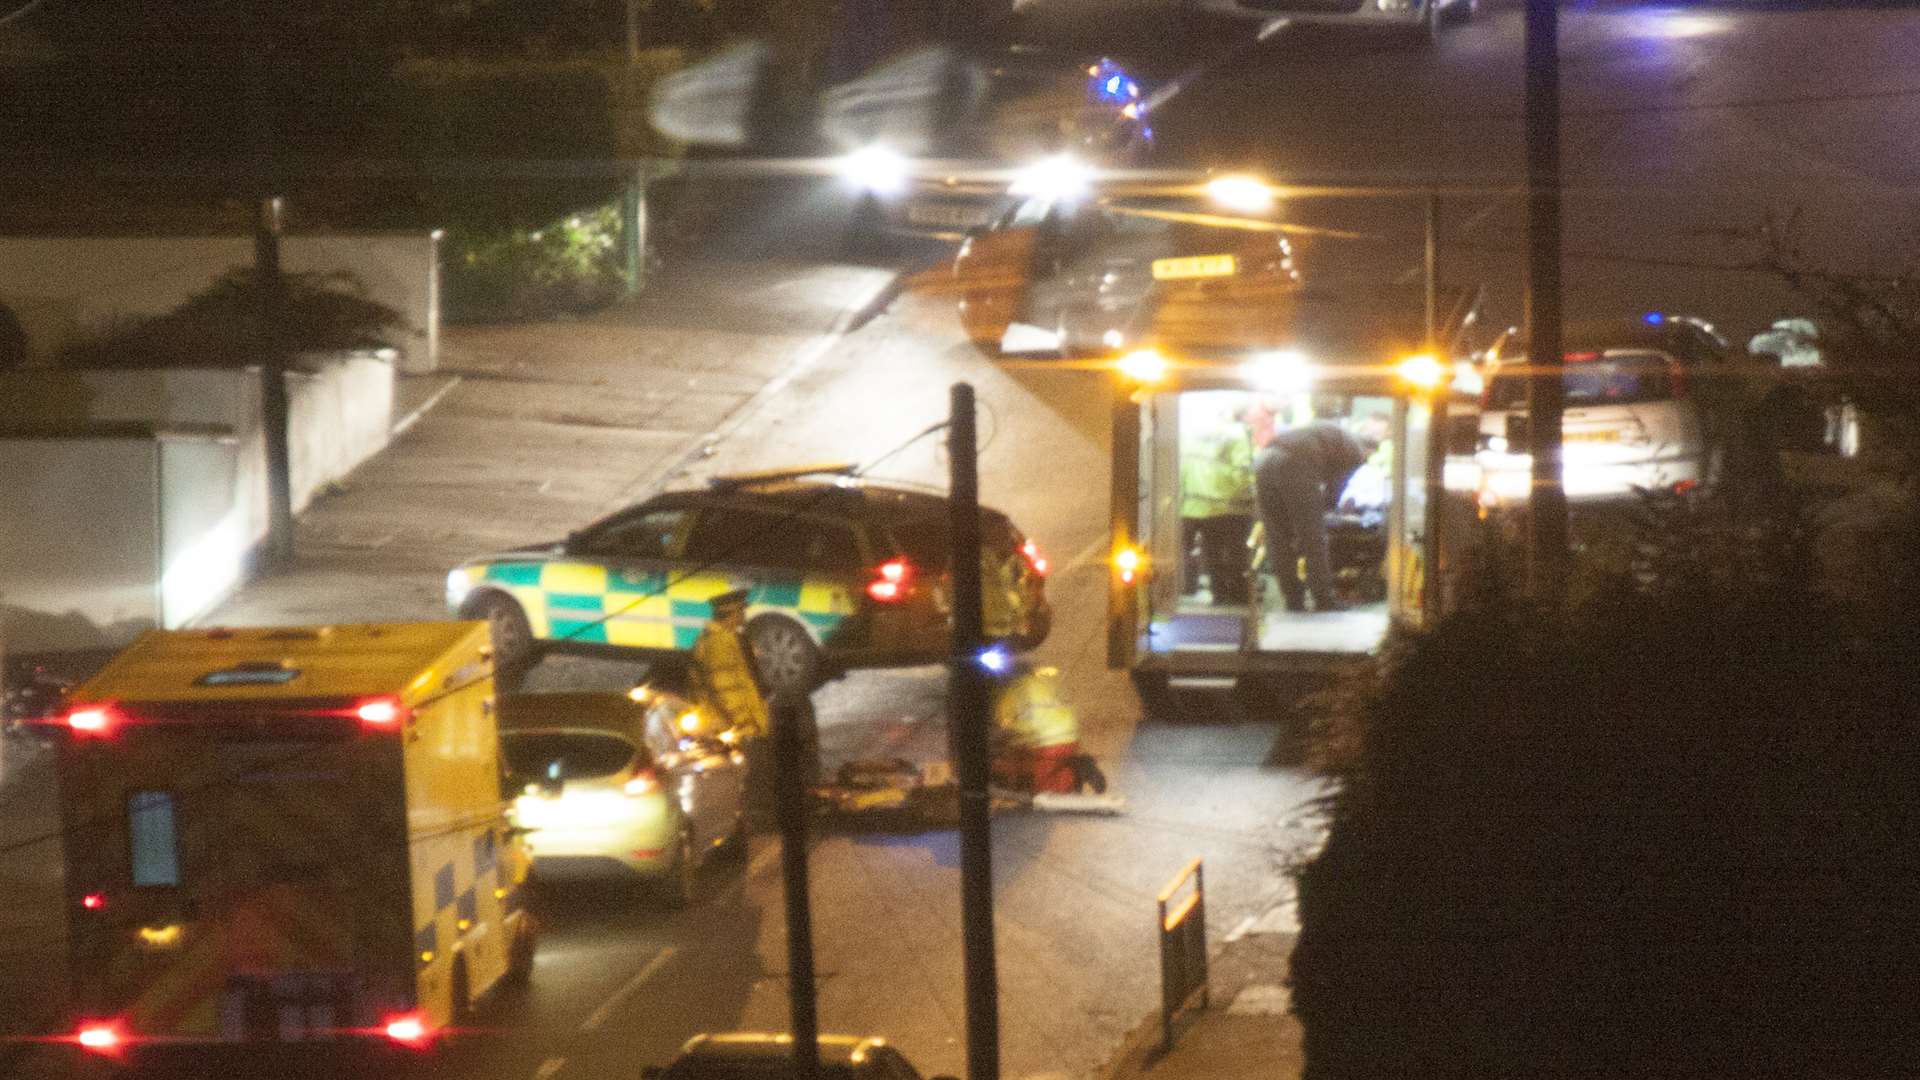 Emergency services at the scene. Picture: Patrick Burgess